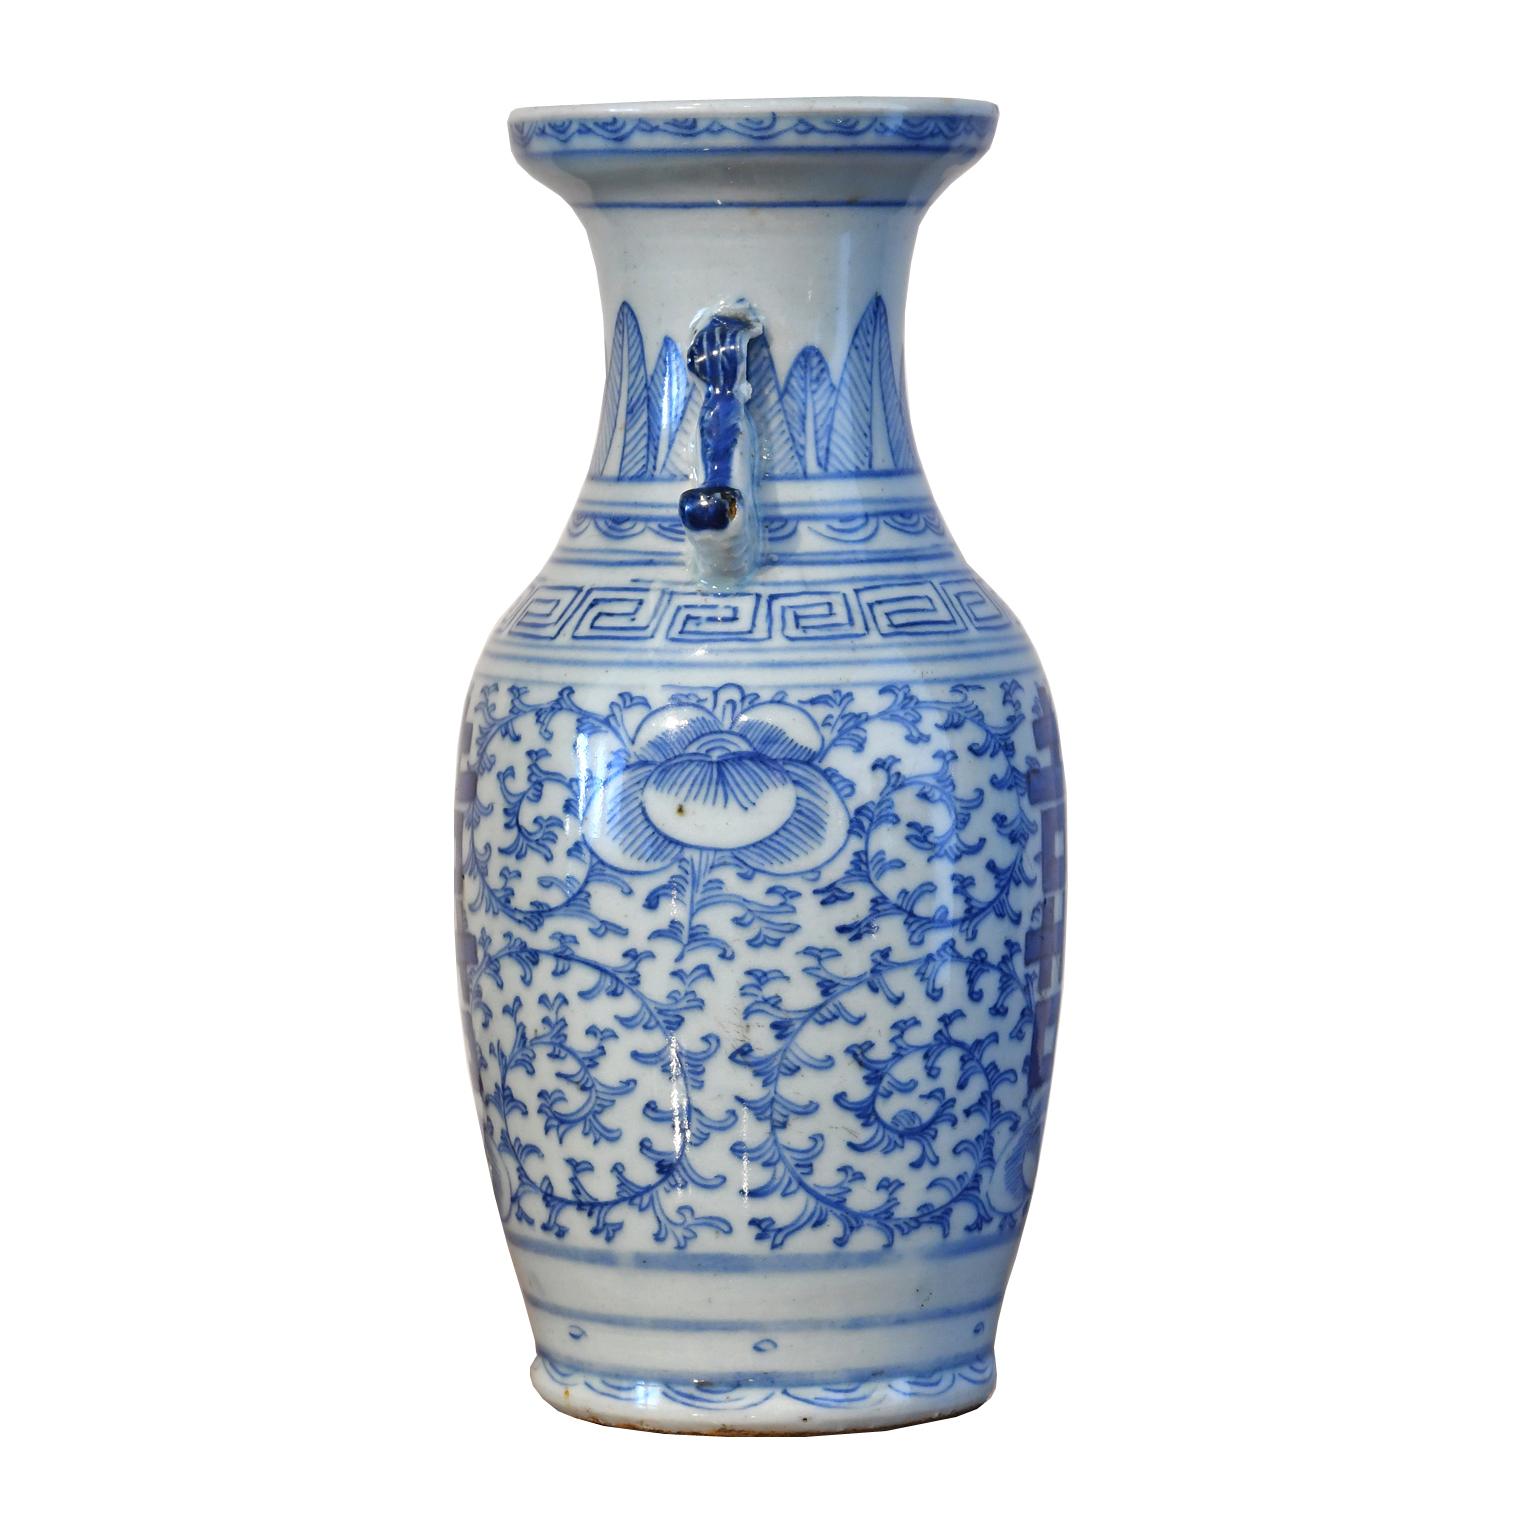 A Qing Chinese porcelain vase with baluster-form, hand-painted with cobalt blue decoration of 